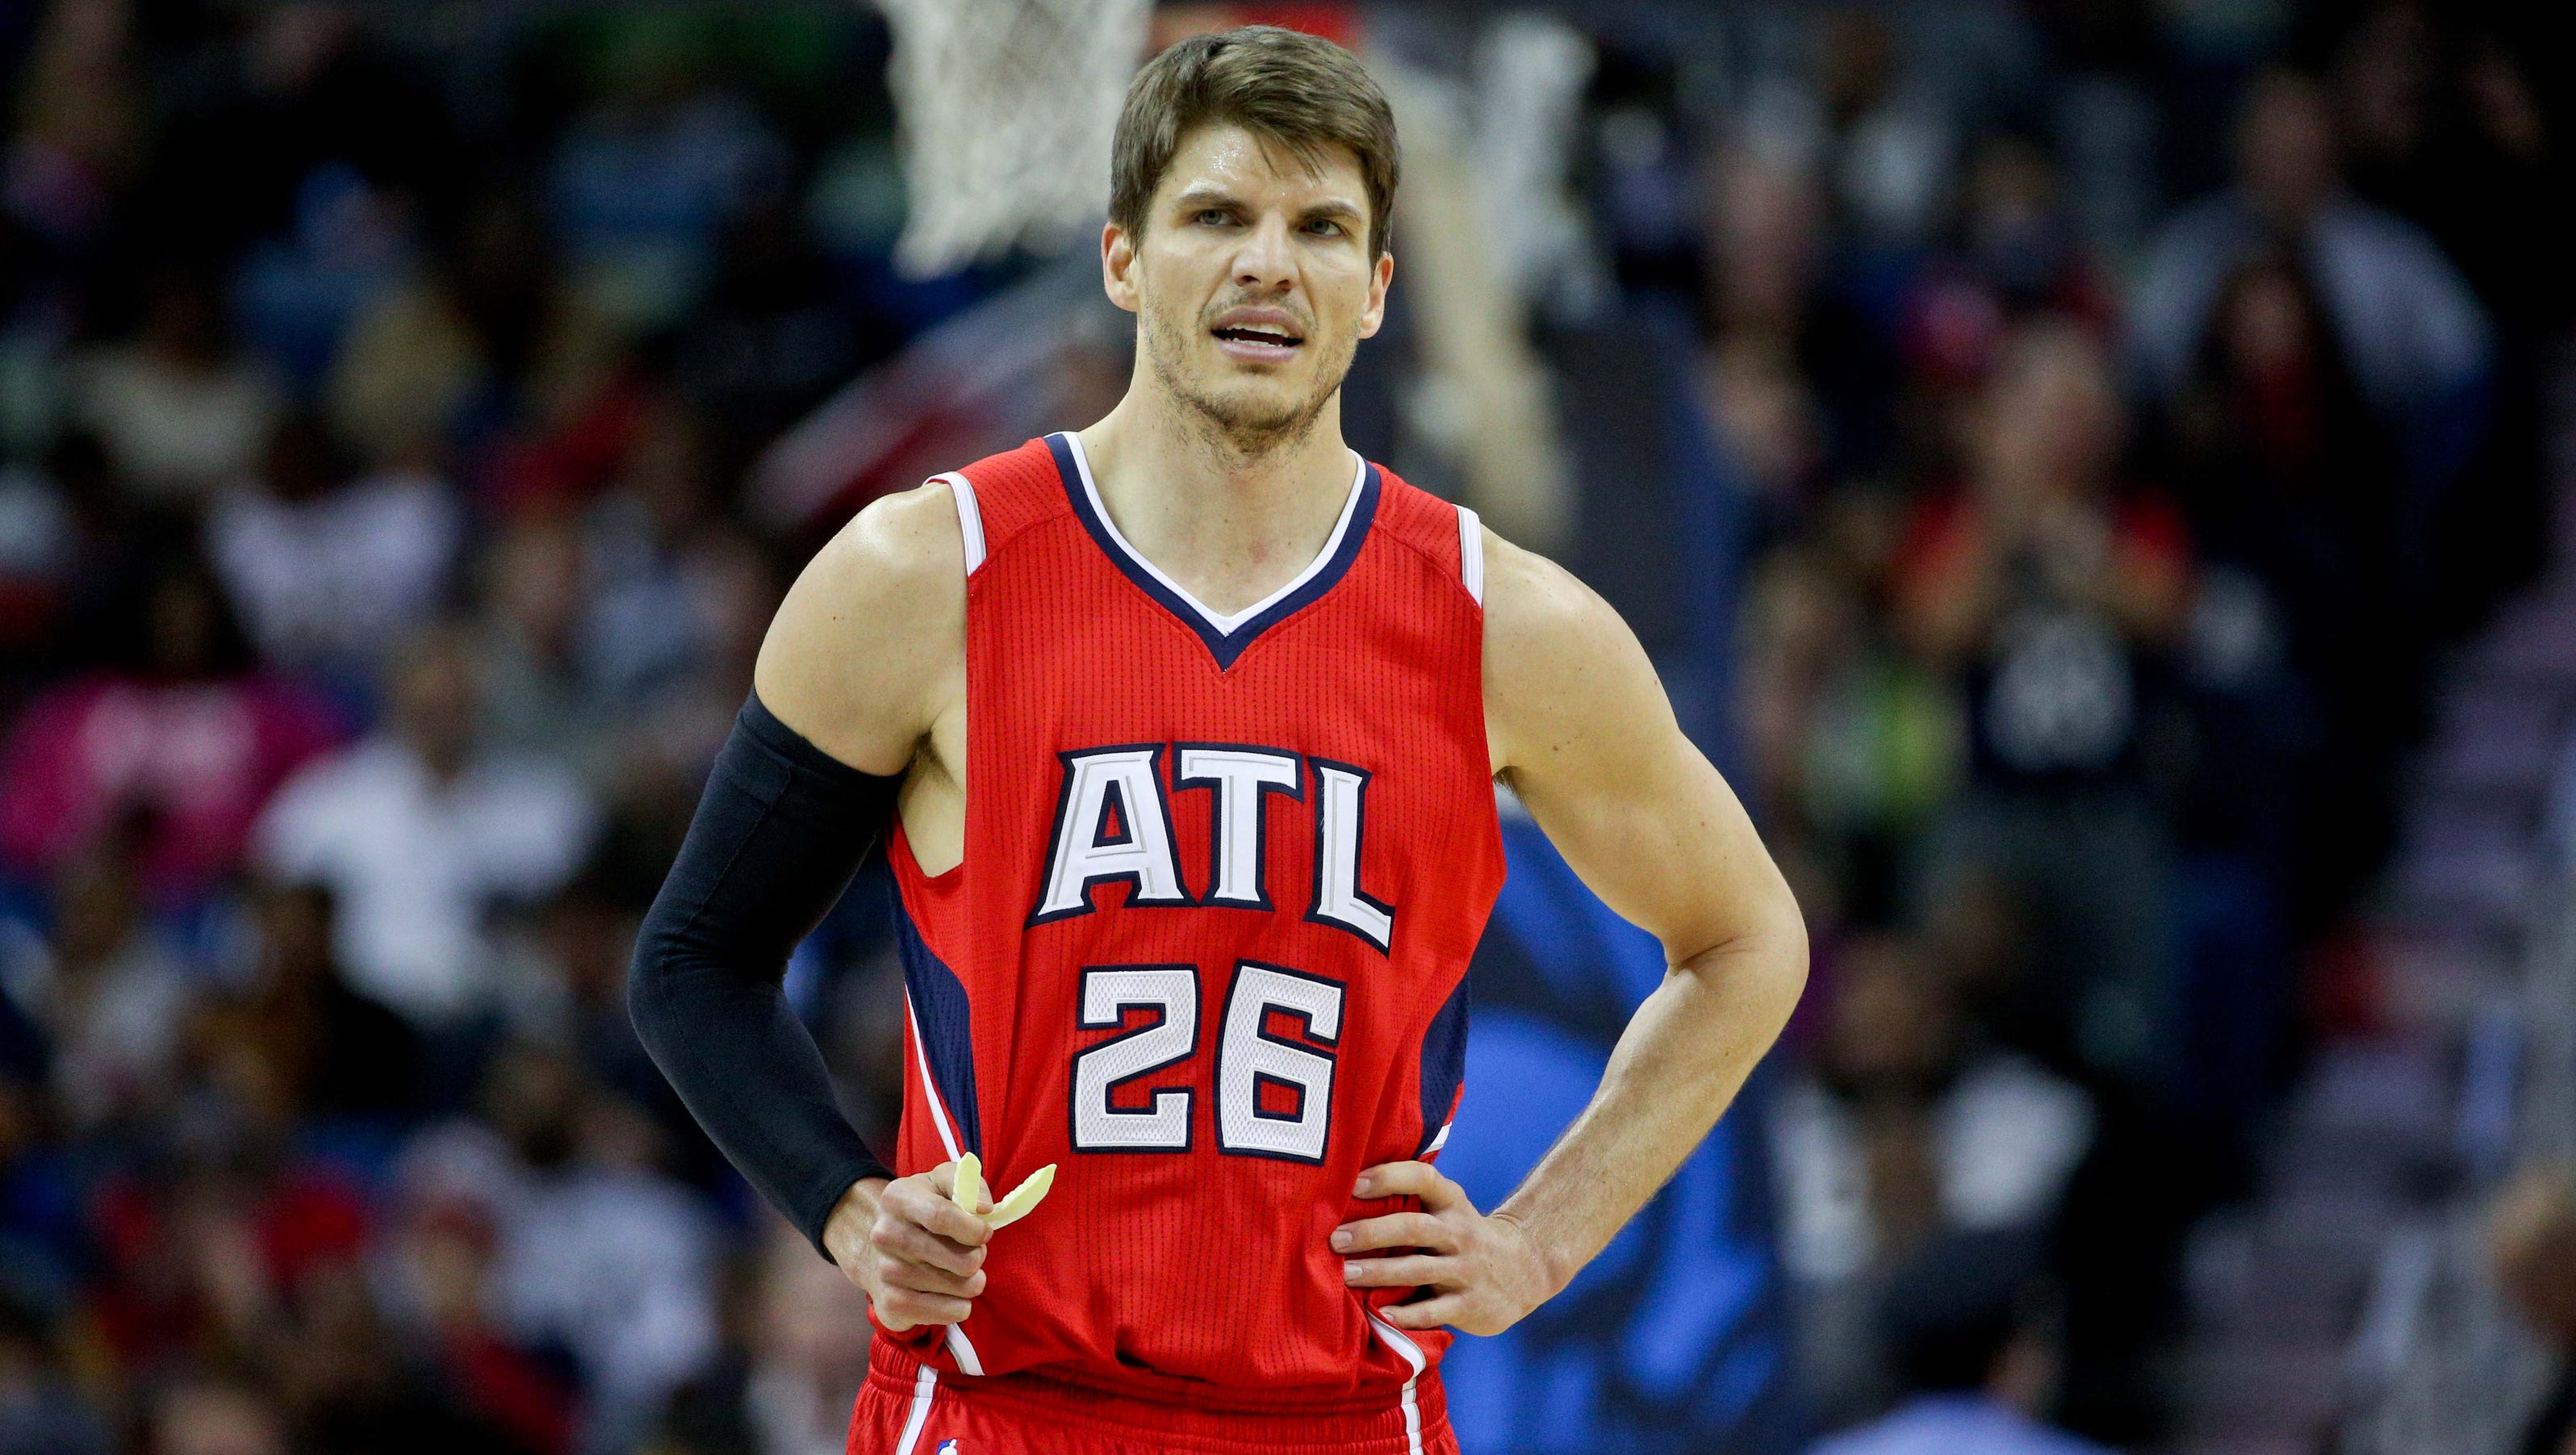 Kyle Korver to replace Dwyane Wade on All Star team3200 x 1800